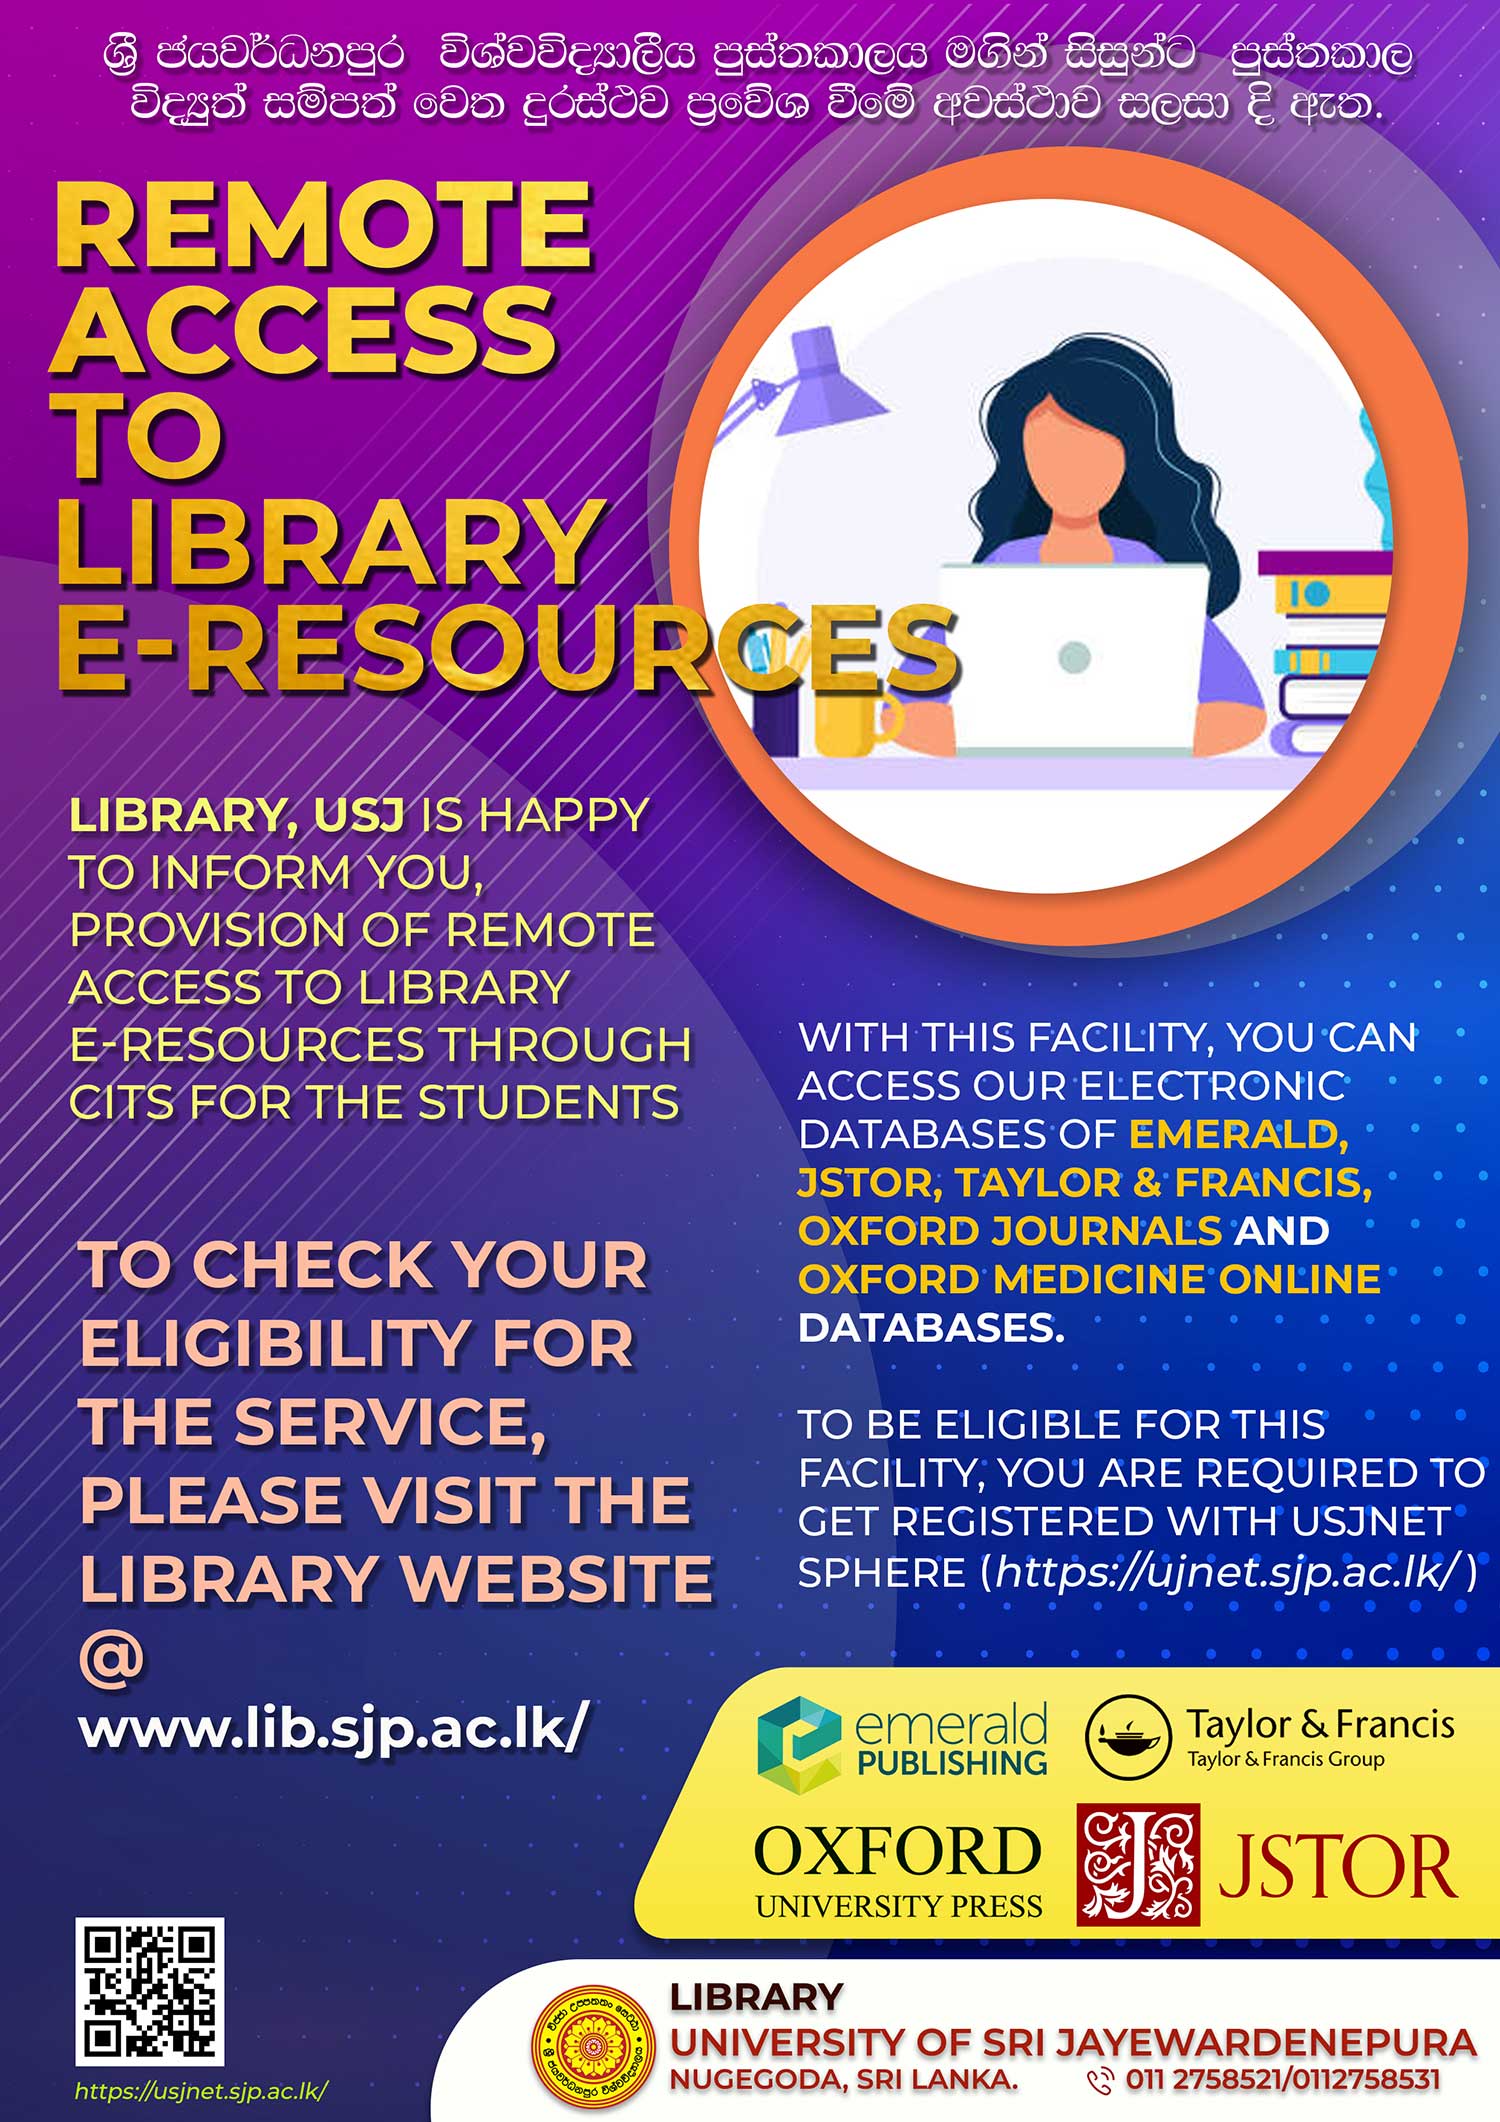 Remote Access to Library E-Resources